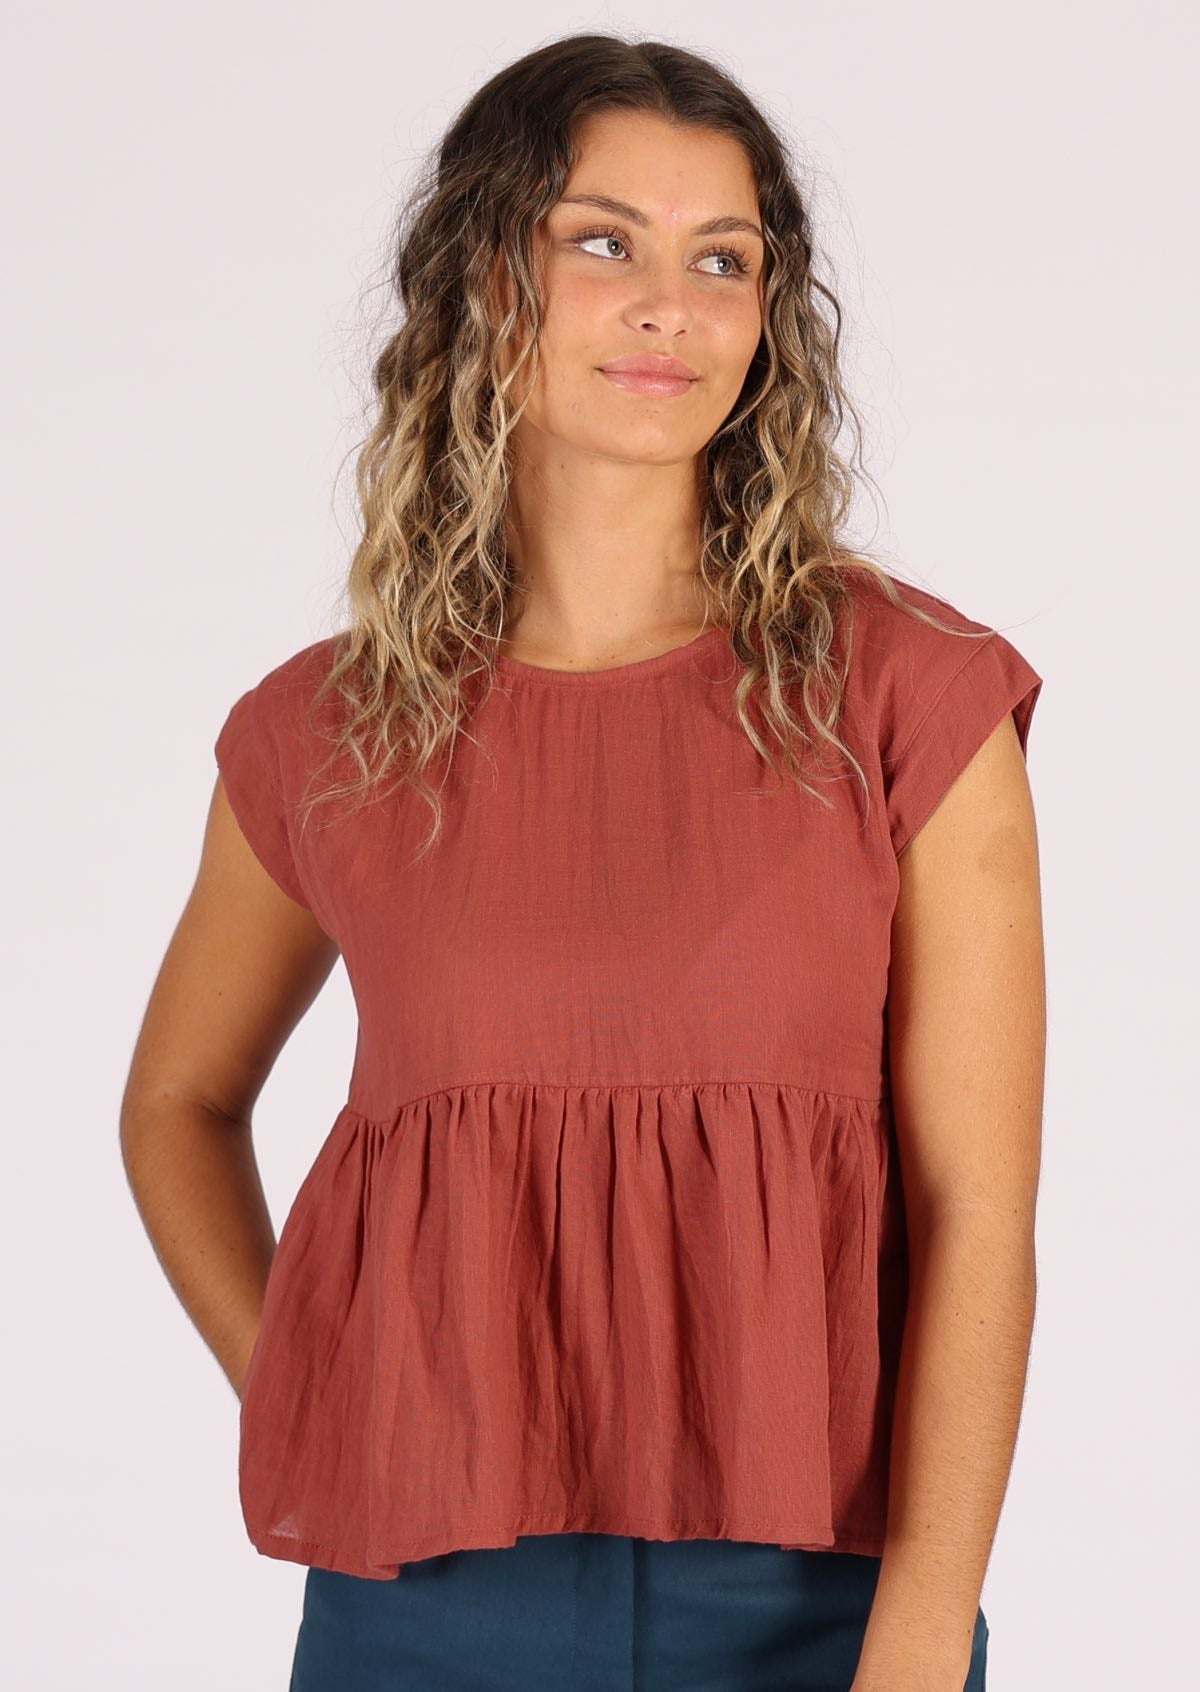 Cotton gauze terracotta coloured top with ruffle all around